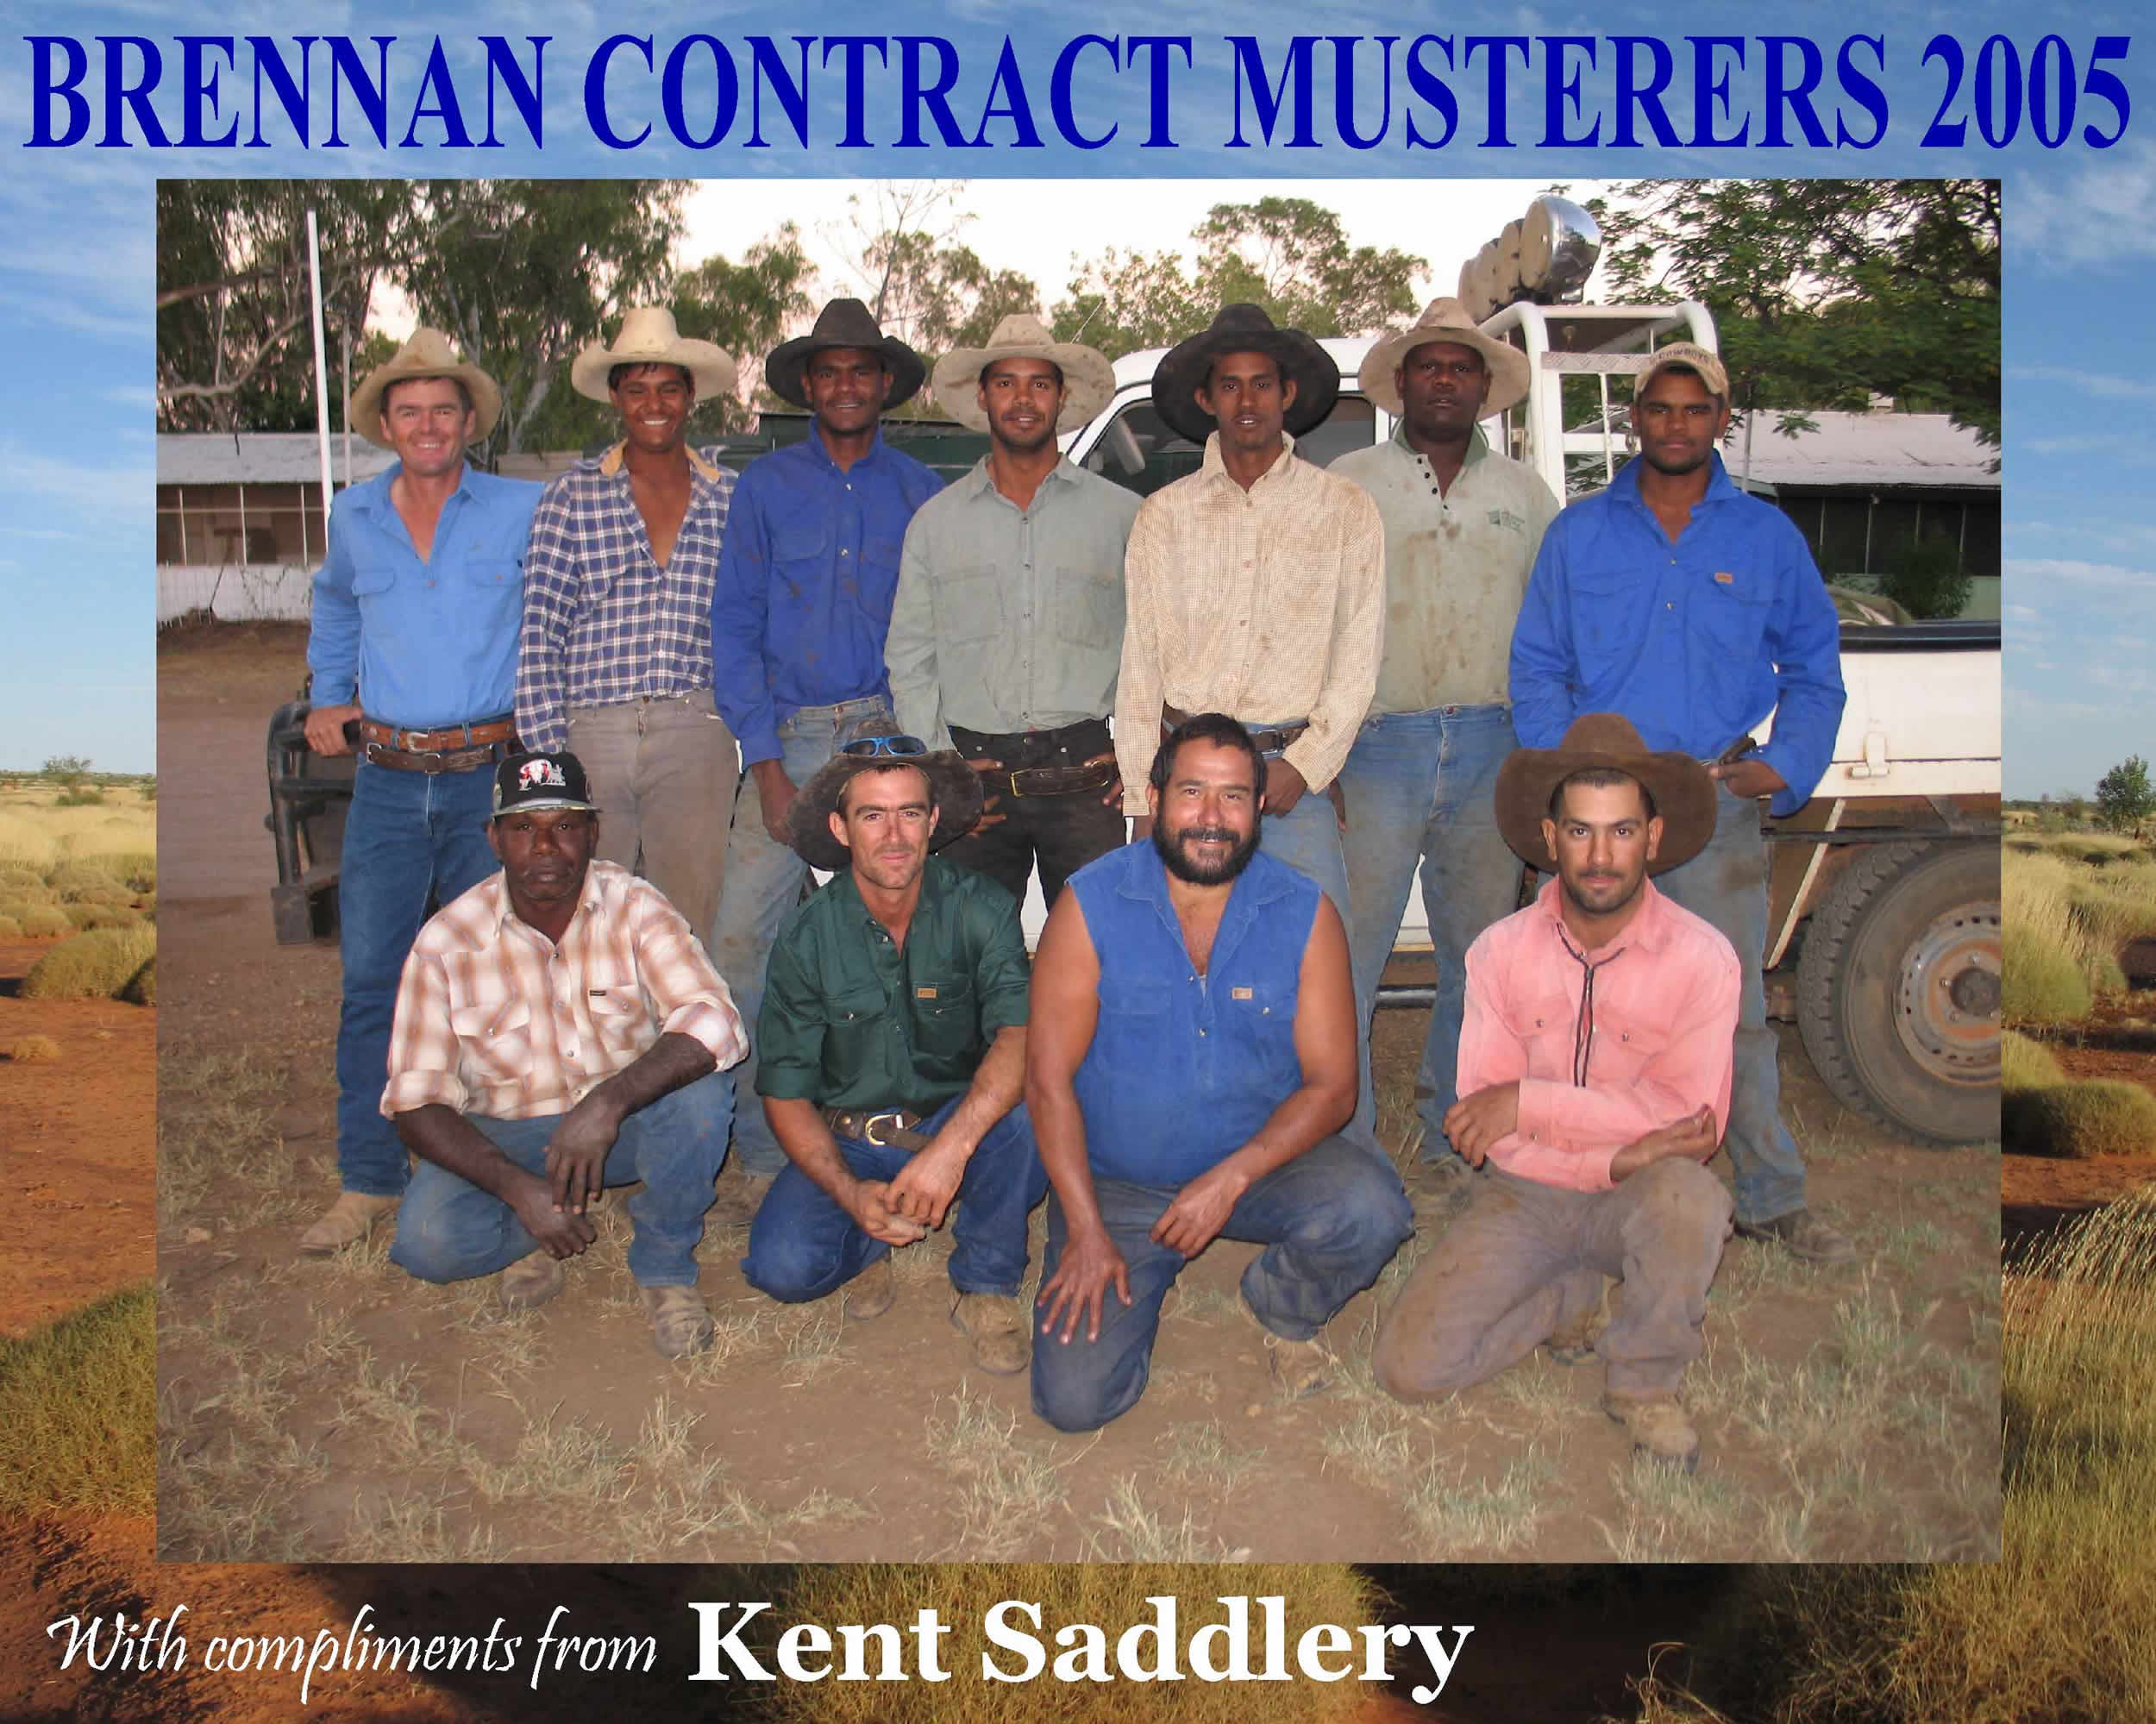 Drovers & Contractors - Brennan Contract Mustering 2